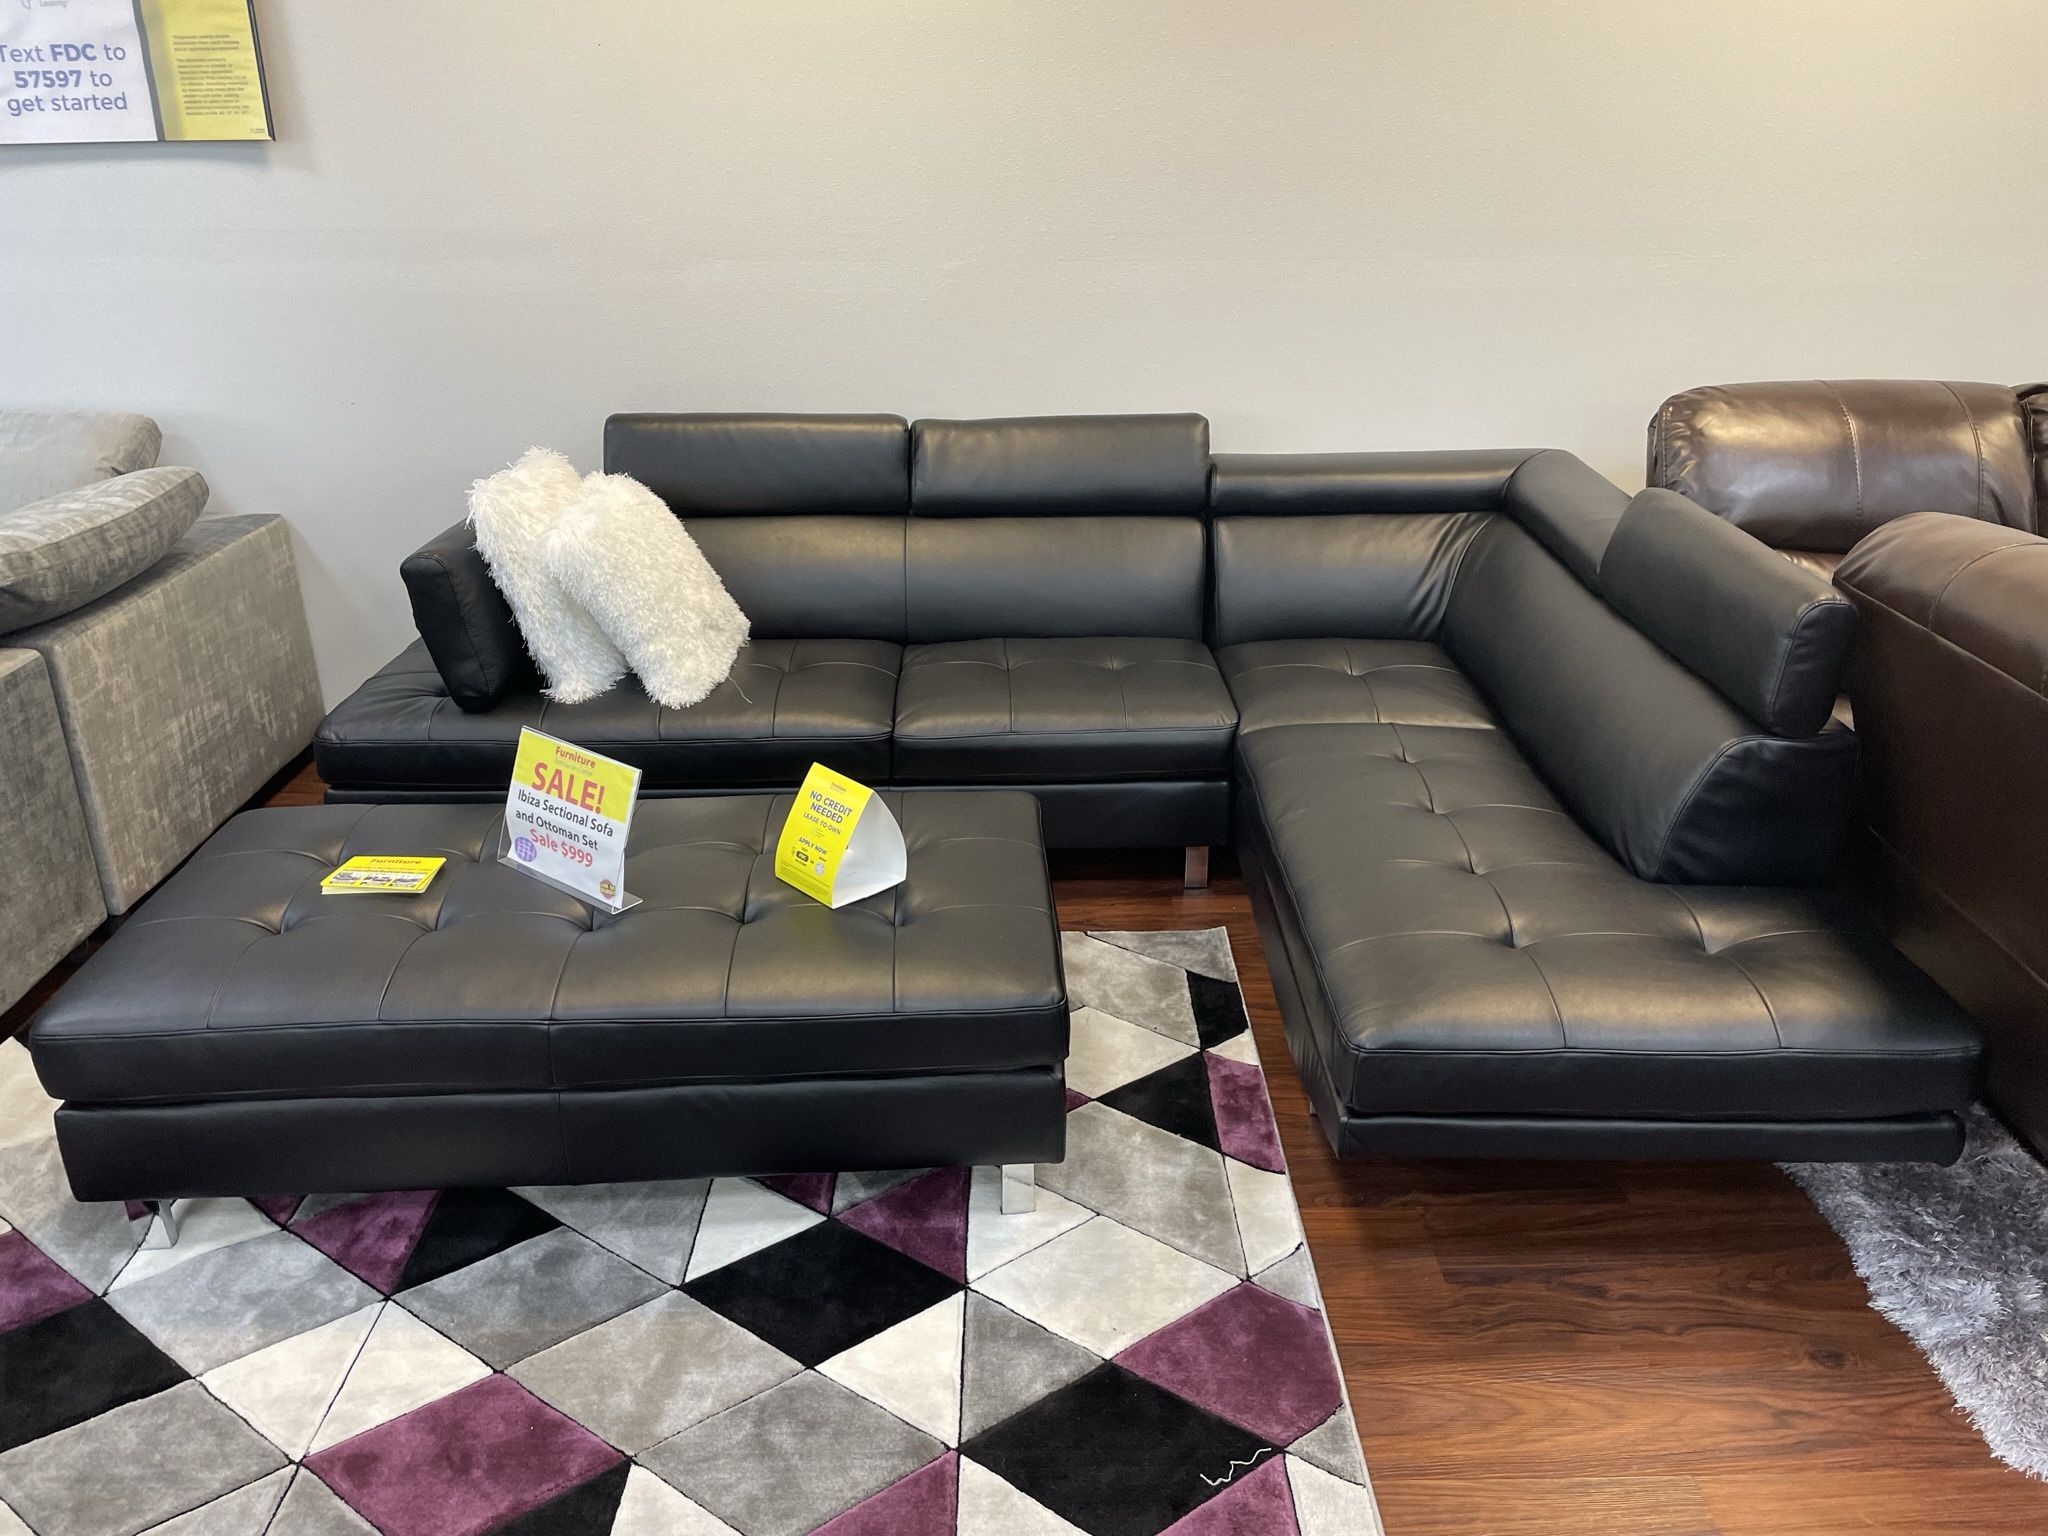 Black Ibiza Leather Sectional Sofa With Ottoman ** Ellenton ** $50 Down No Credit Needed